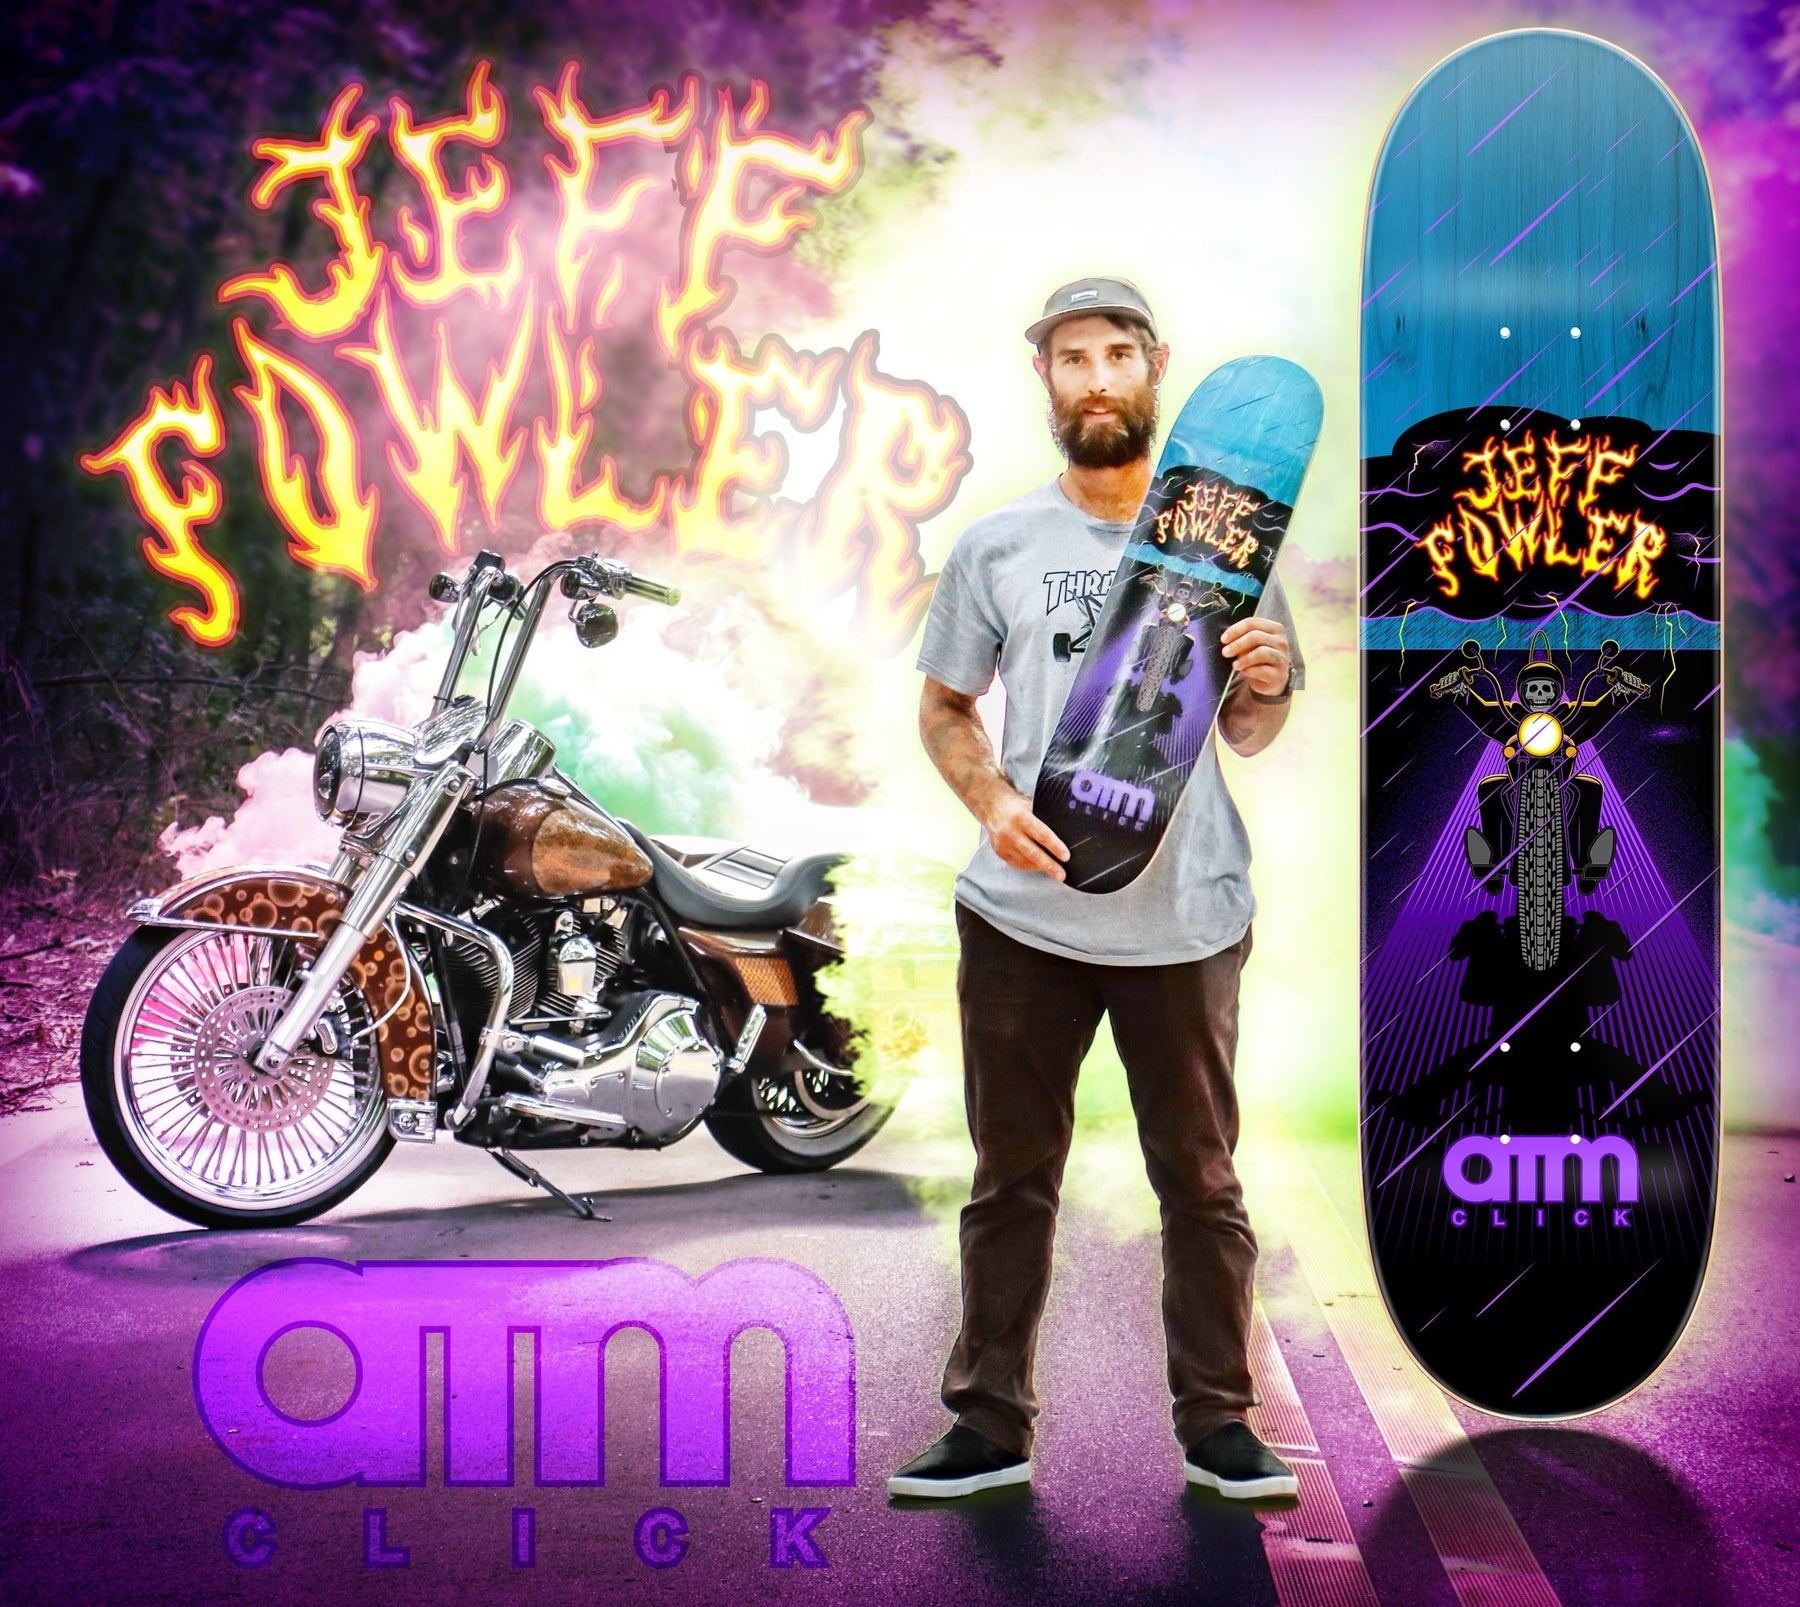 Jeff Fowler PRO for ATM Click